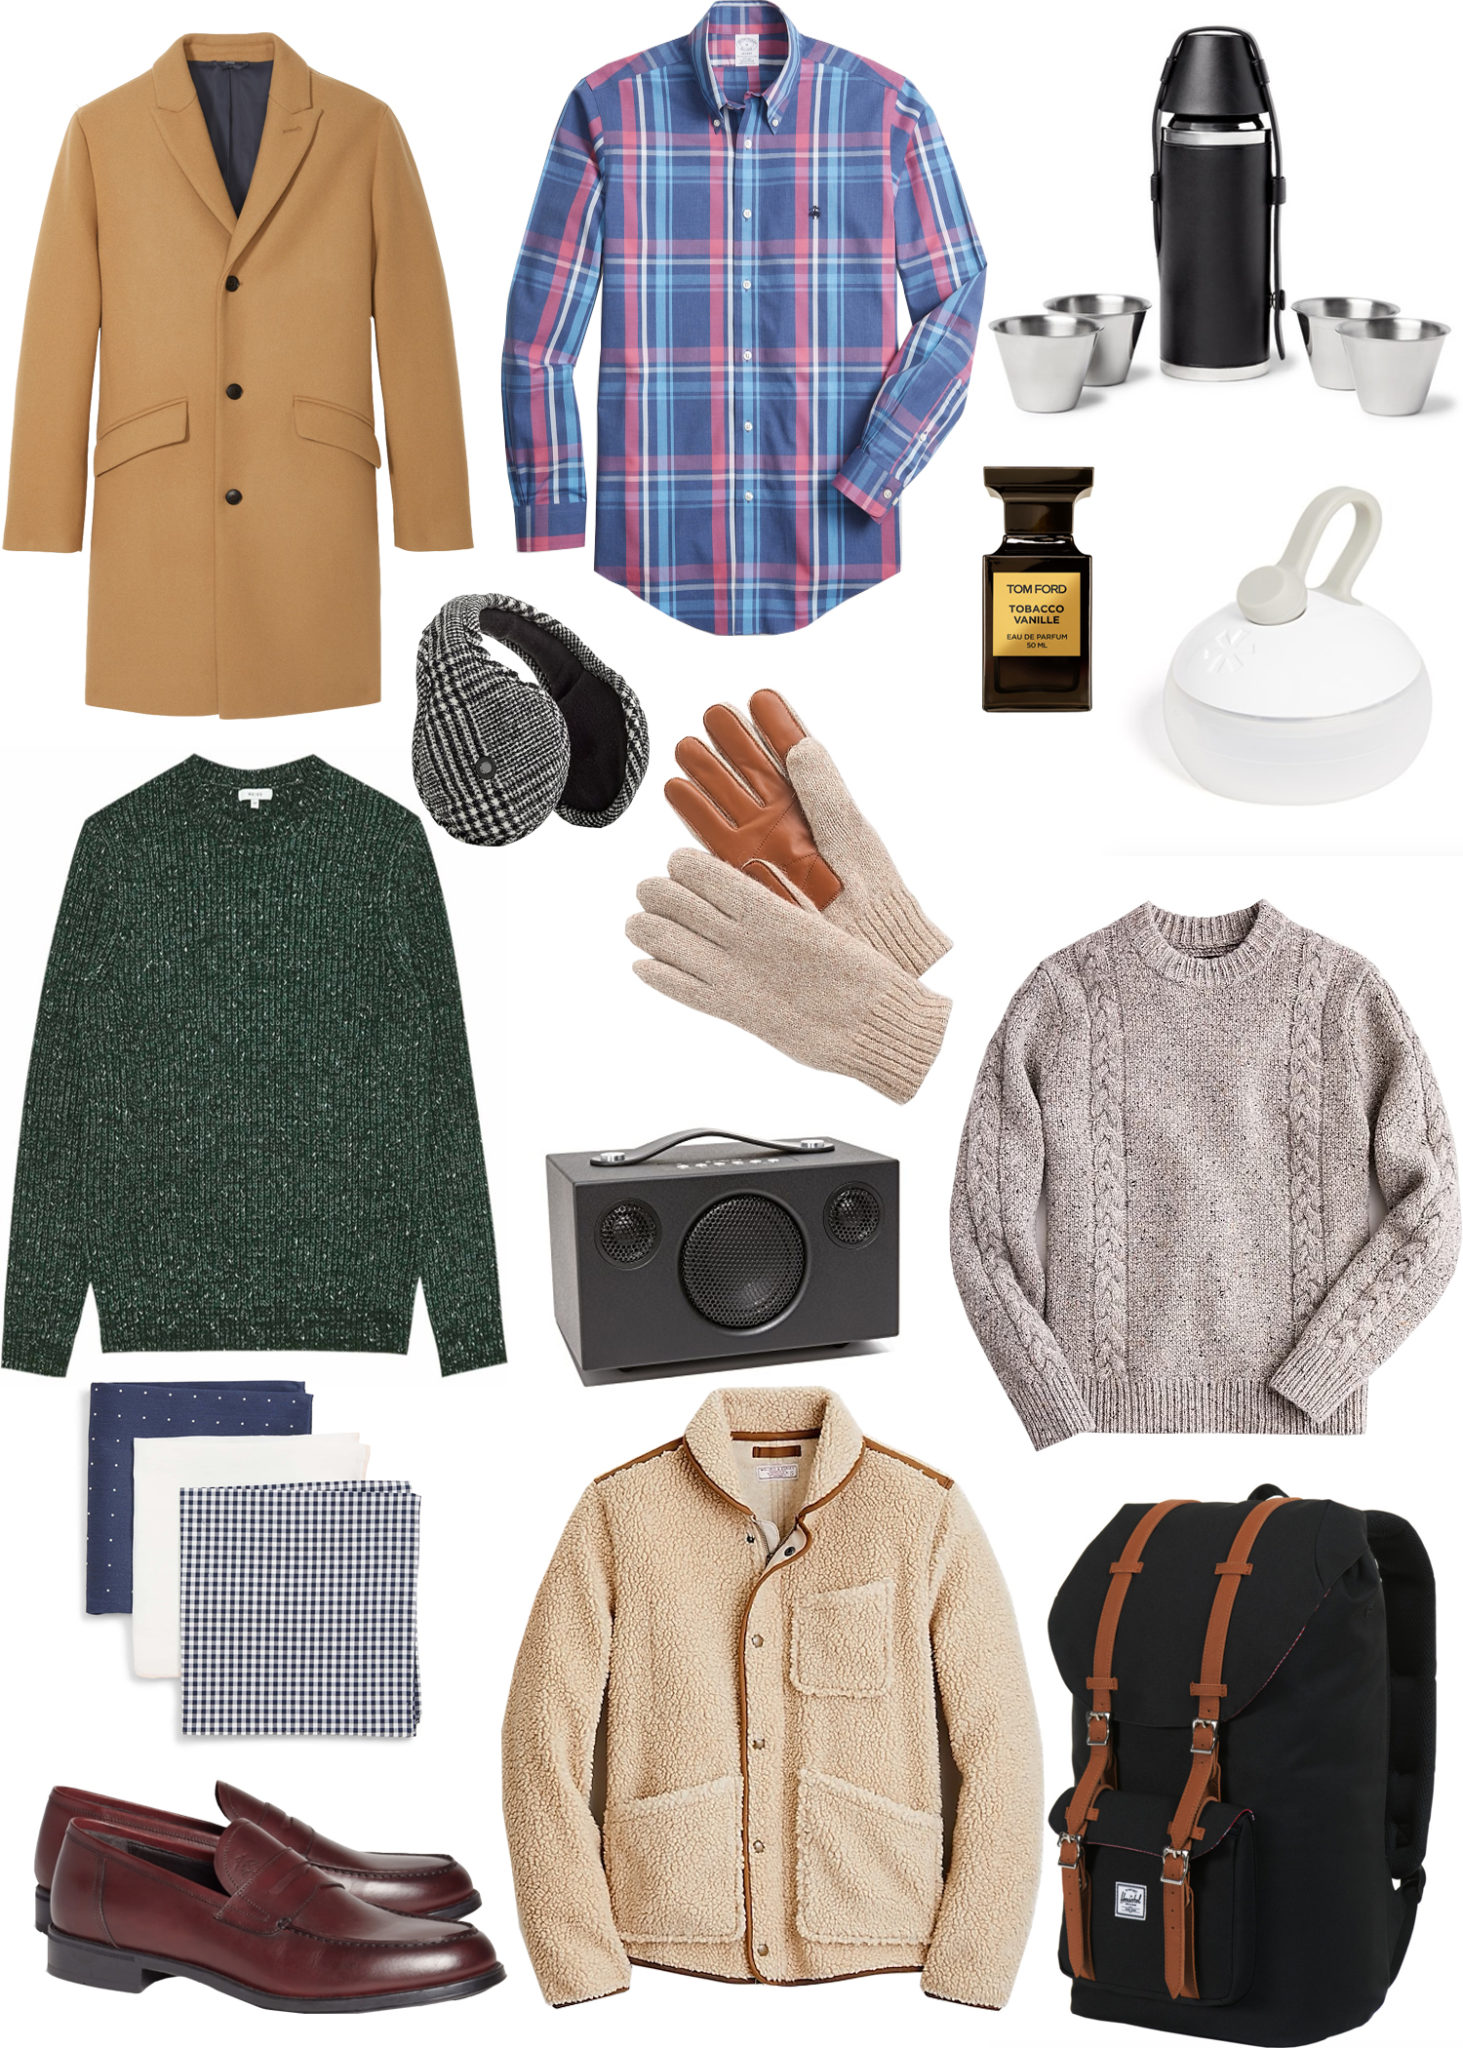 Holiday Gift Guide: For Men - Blush & Blooms Holidays